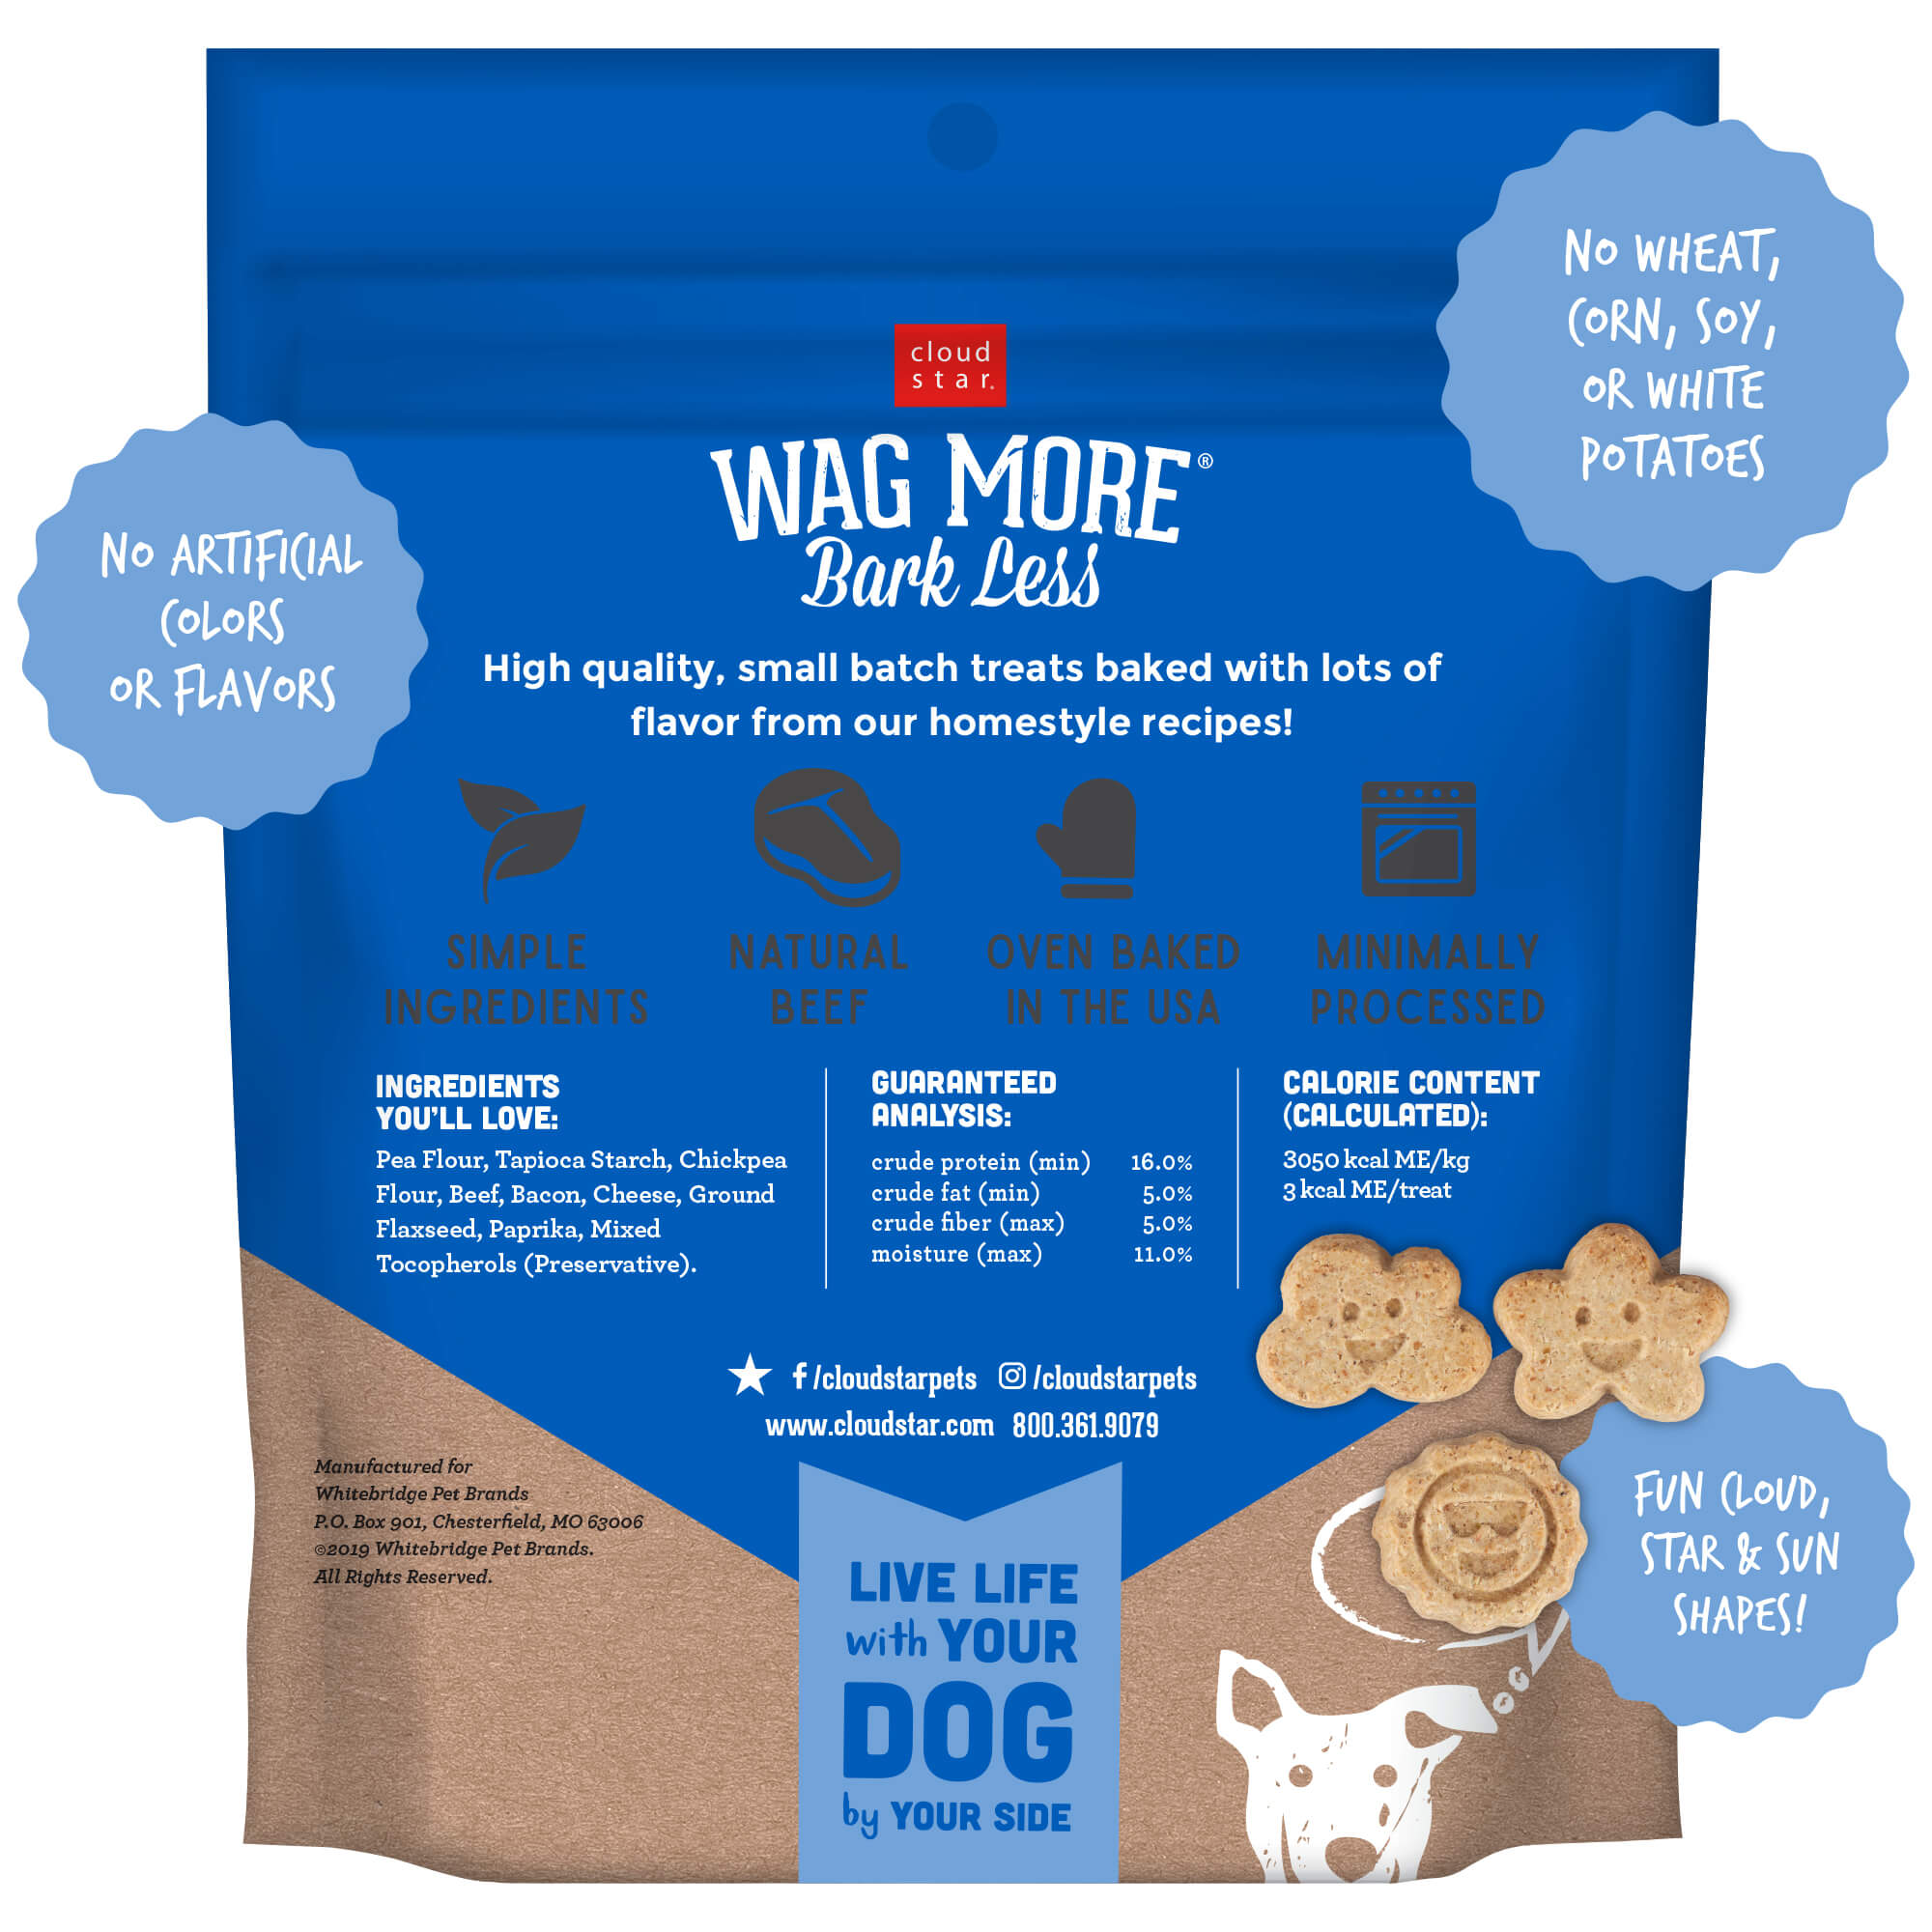 Cloud Star Wag More Bark Less Mini Biscuits Oven Baked Dog Treats with Beef, Bacon & Cheese, 7oz